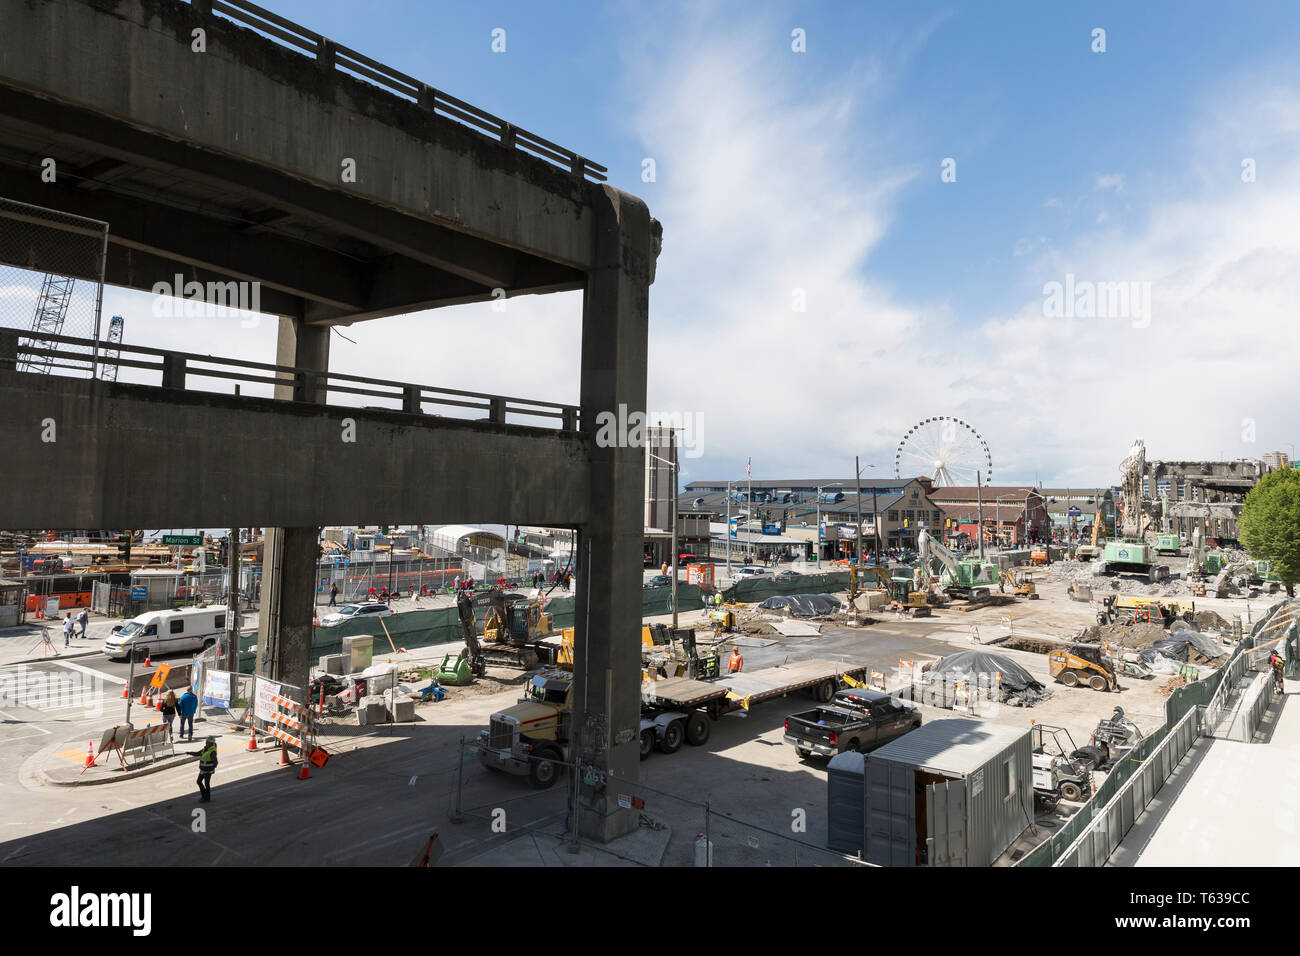 Seattle, Washington: Crews demolish the Alaskan Way Viaduct near the Seattle Ferry Terminal on the city’s central waterfront. A new two mile long bore Stock Photo